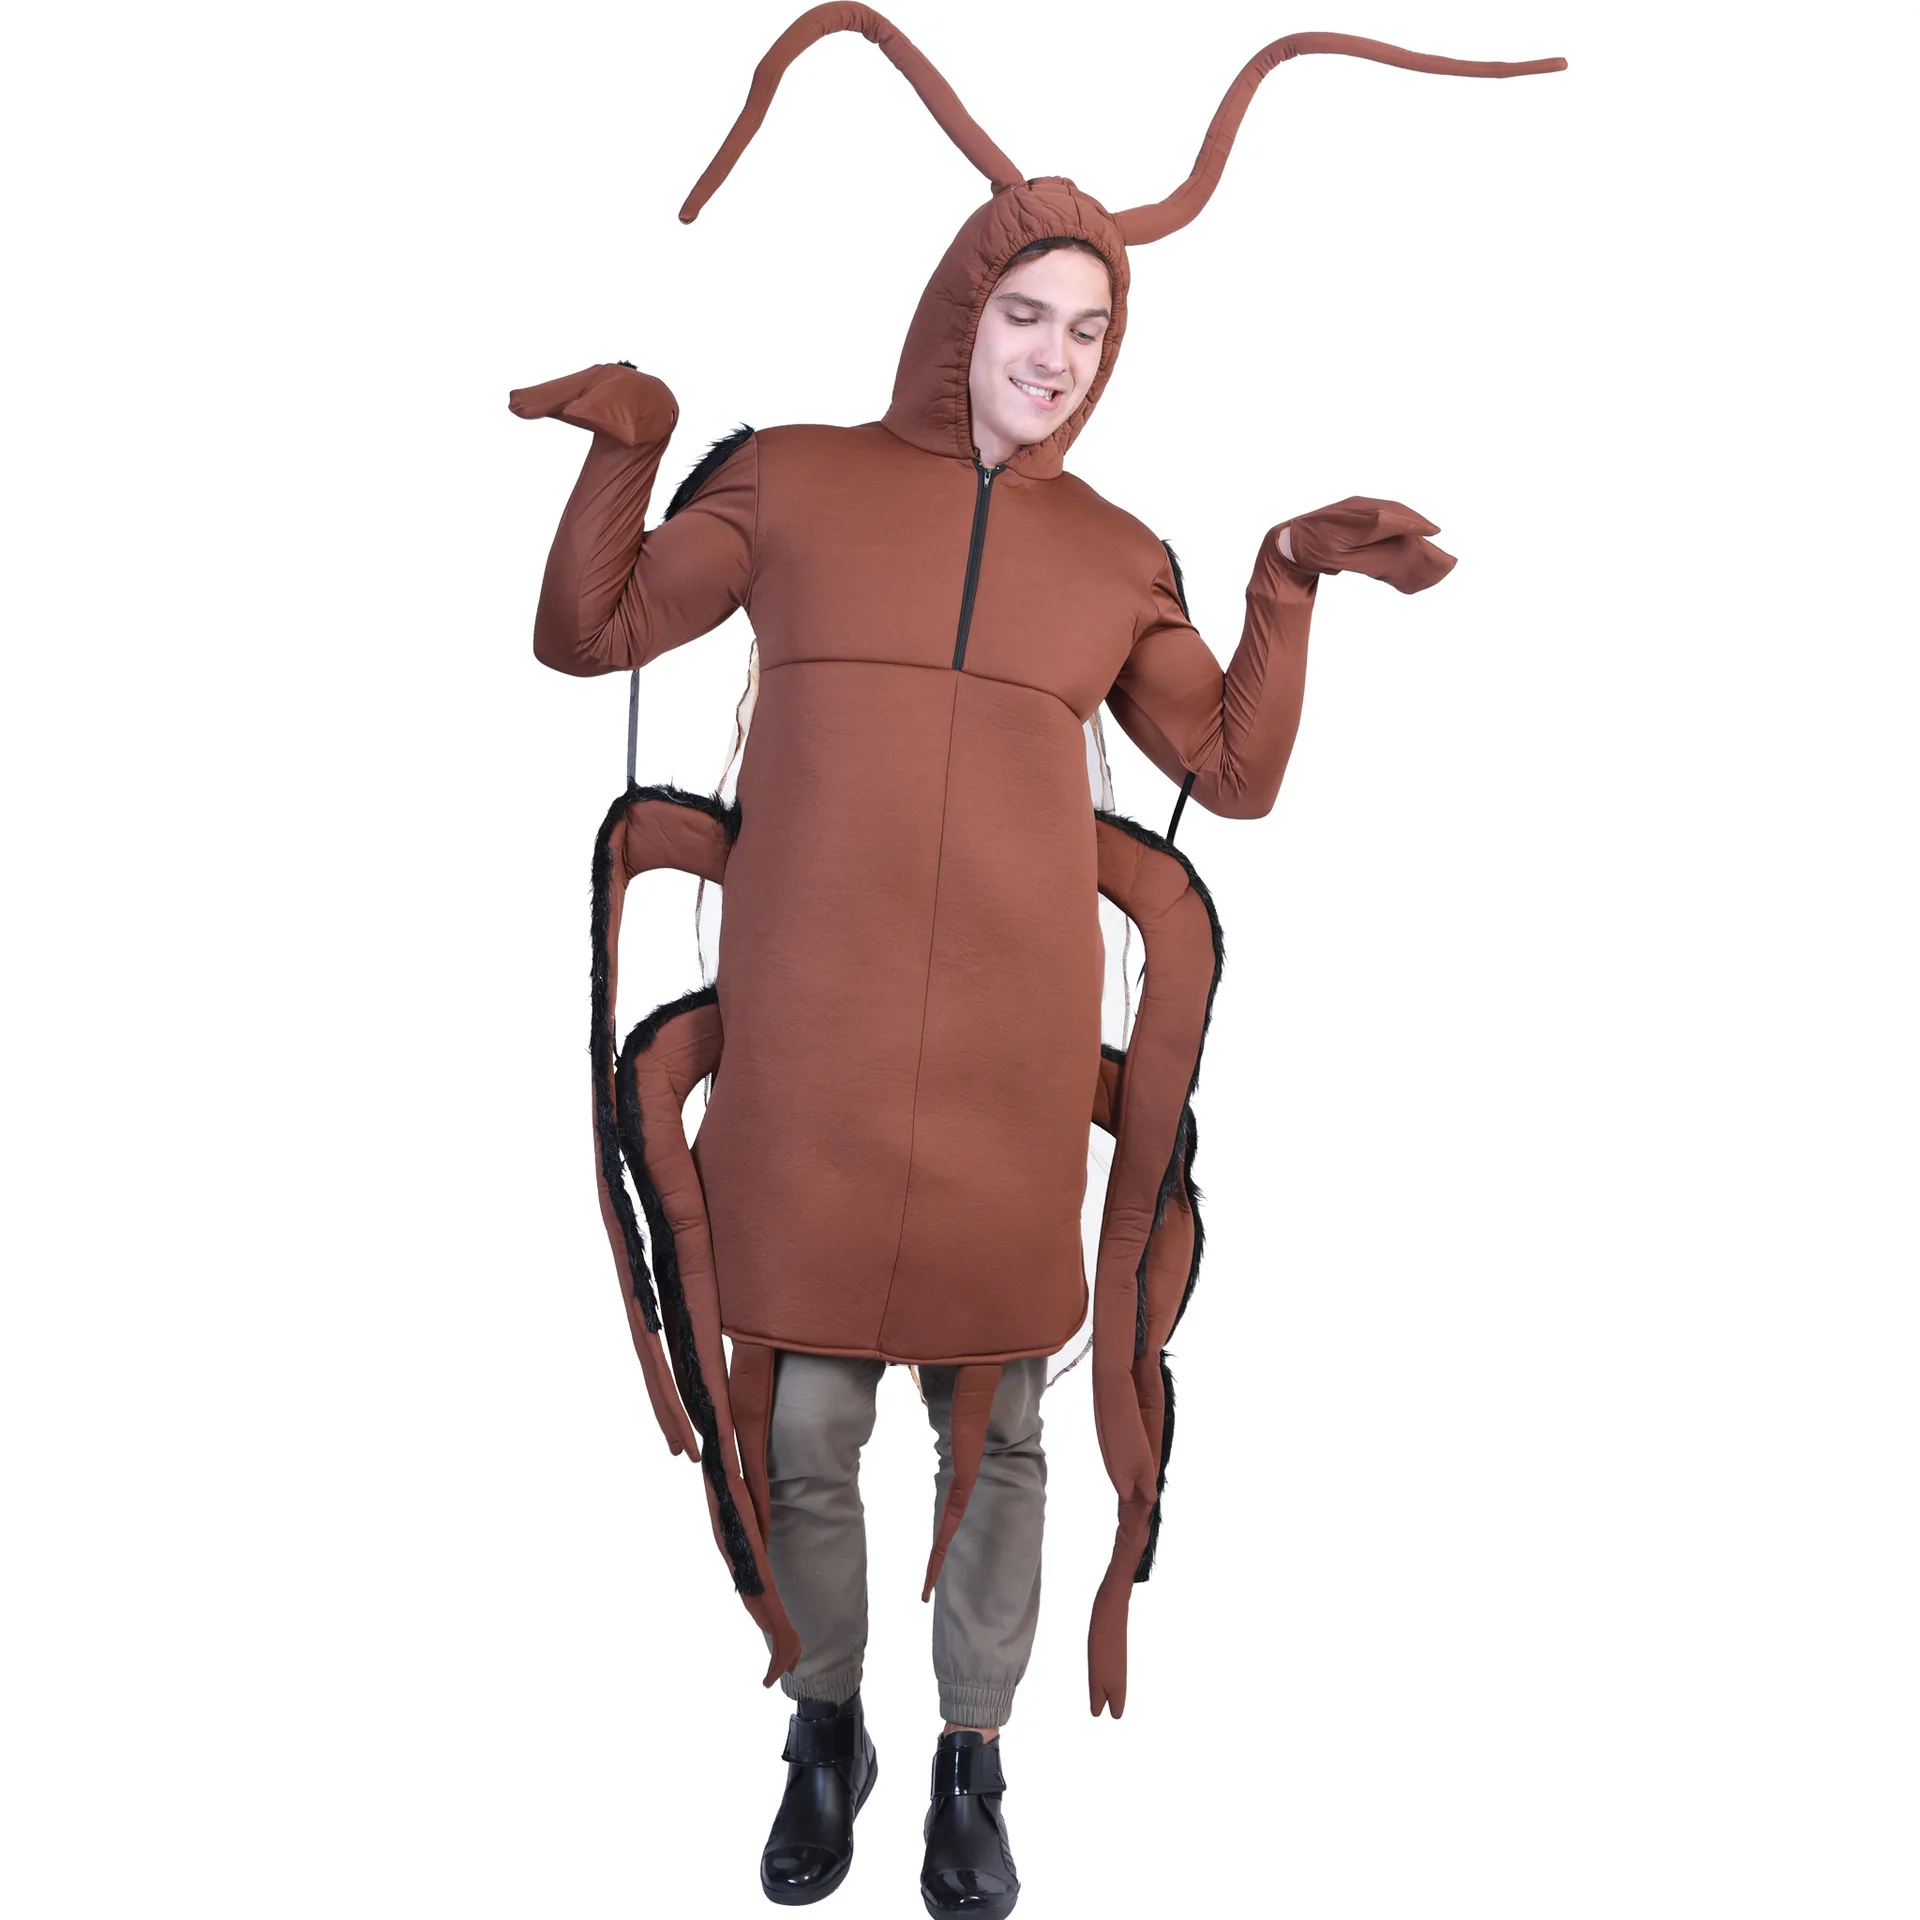 

Funny Party Selfie Animal Cockroach One-Piece Play Costume Halloween Party Props Performance Costume